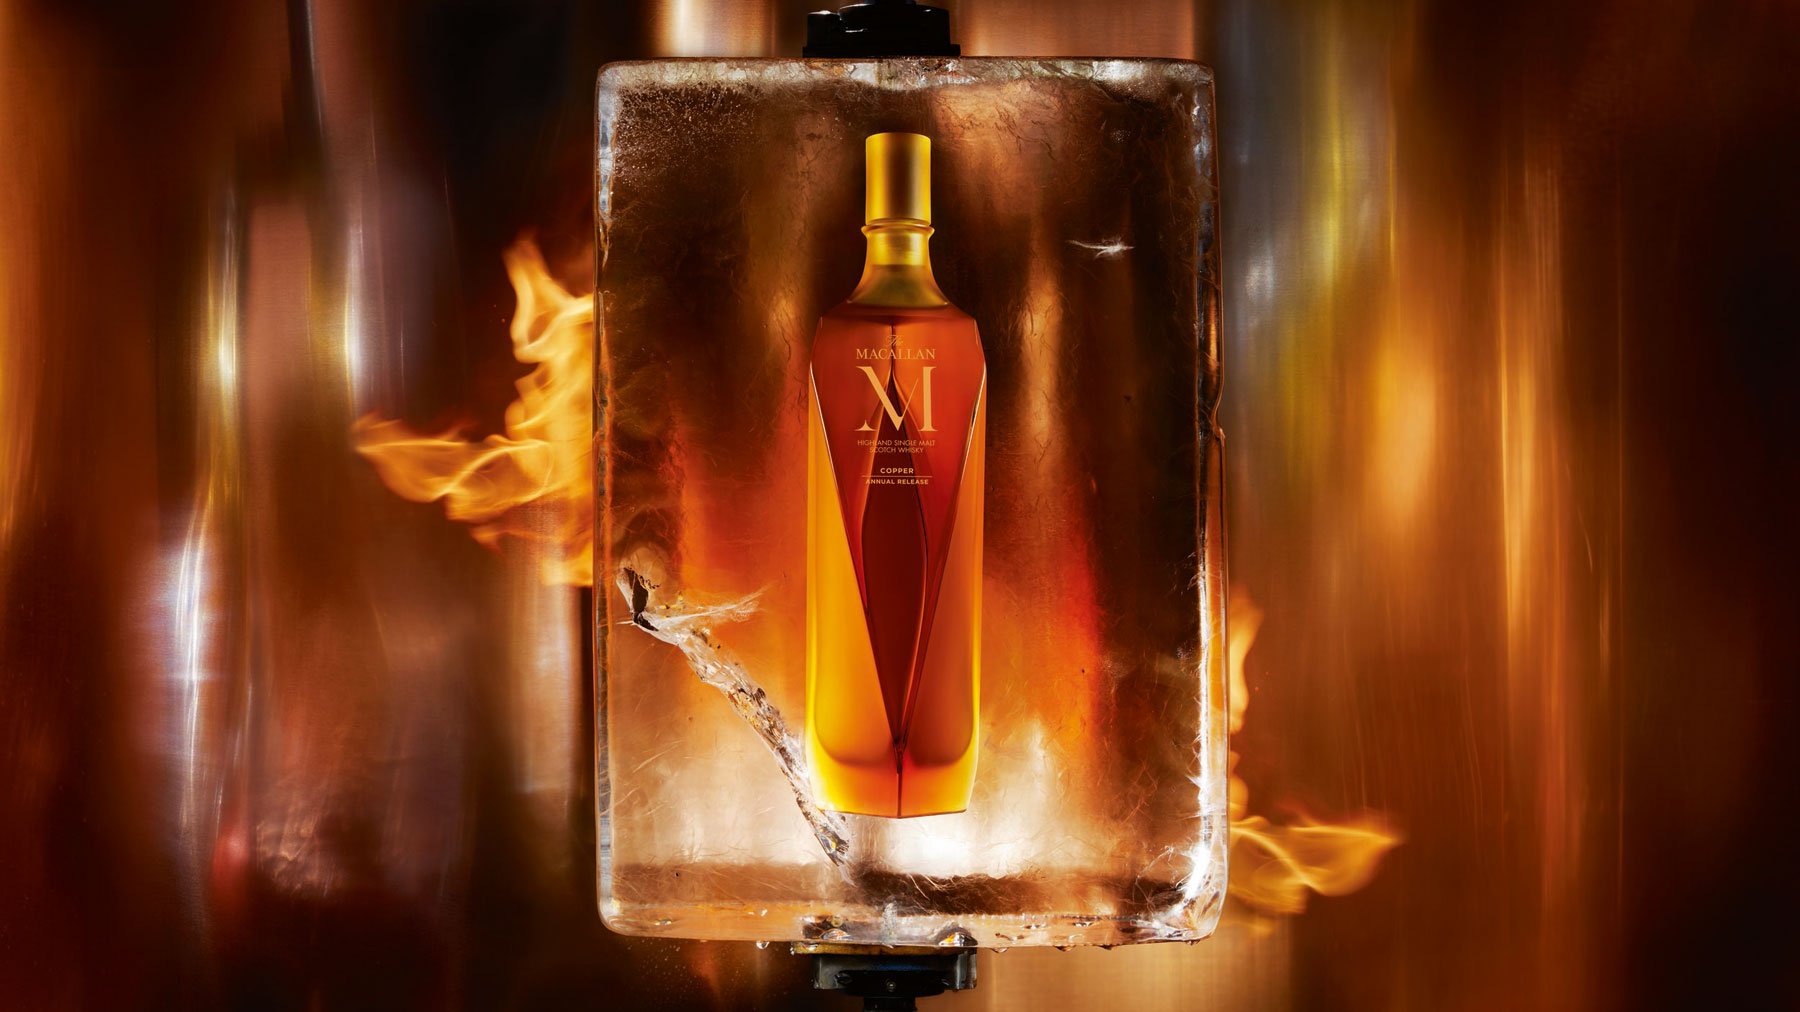 The-Macallan-M-Copper-Landscape-A-Credit-Photography-by-Nick-Knight.jpg